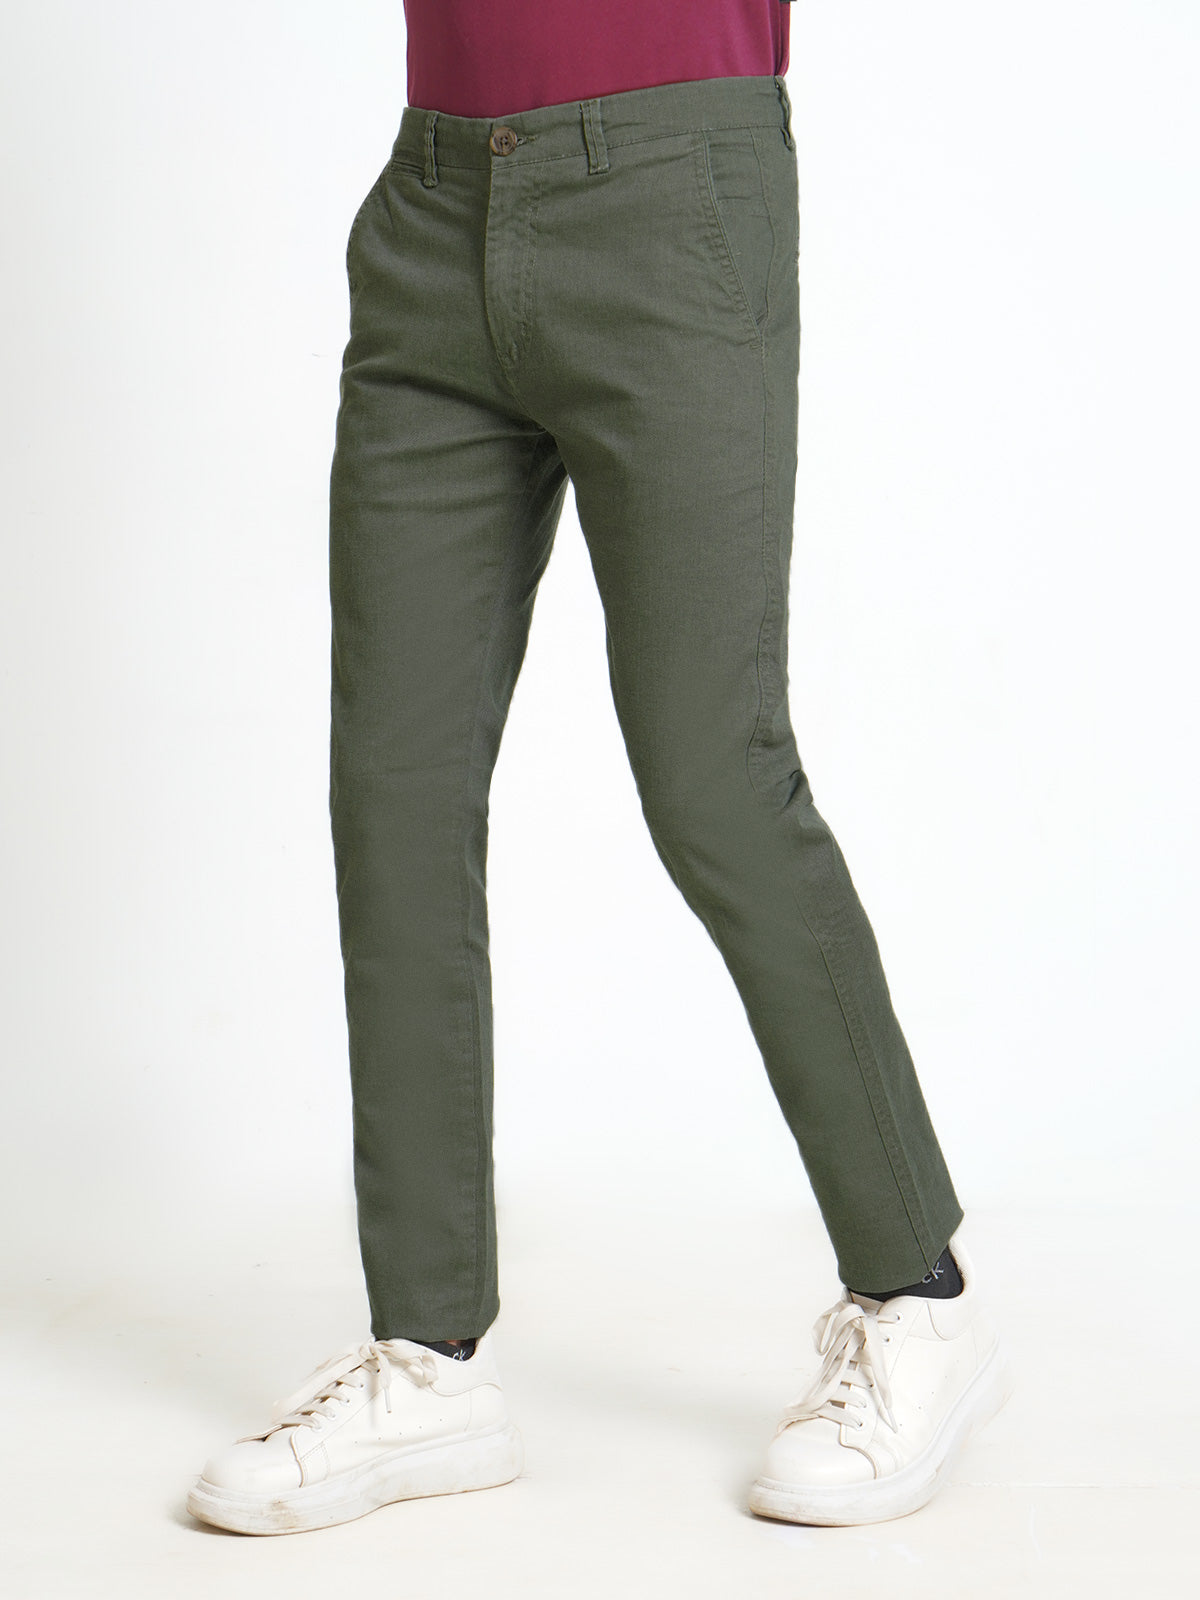 Olive Green Cotton Chino Pant-31